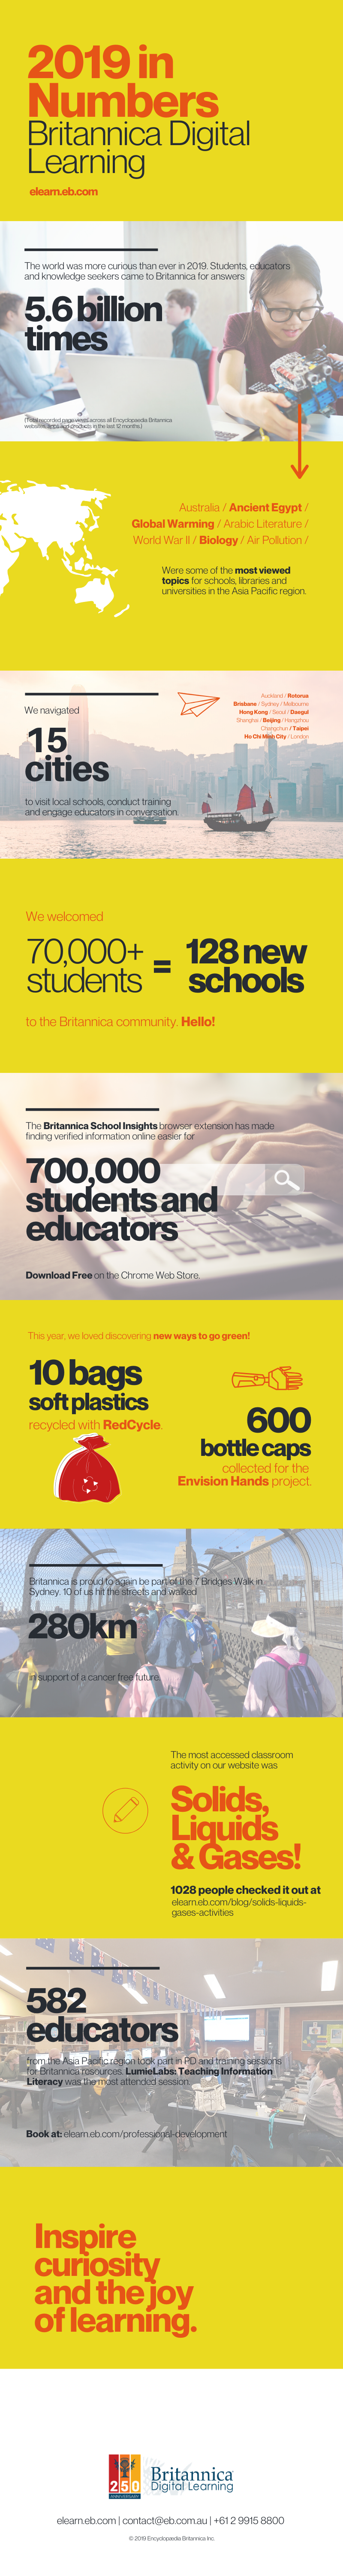 Britannica Digital Learning Year in Numbers 2019